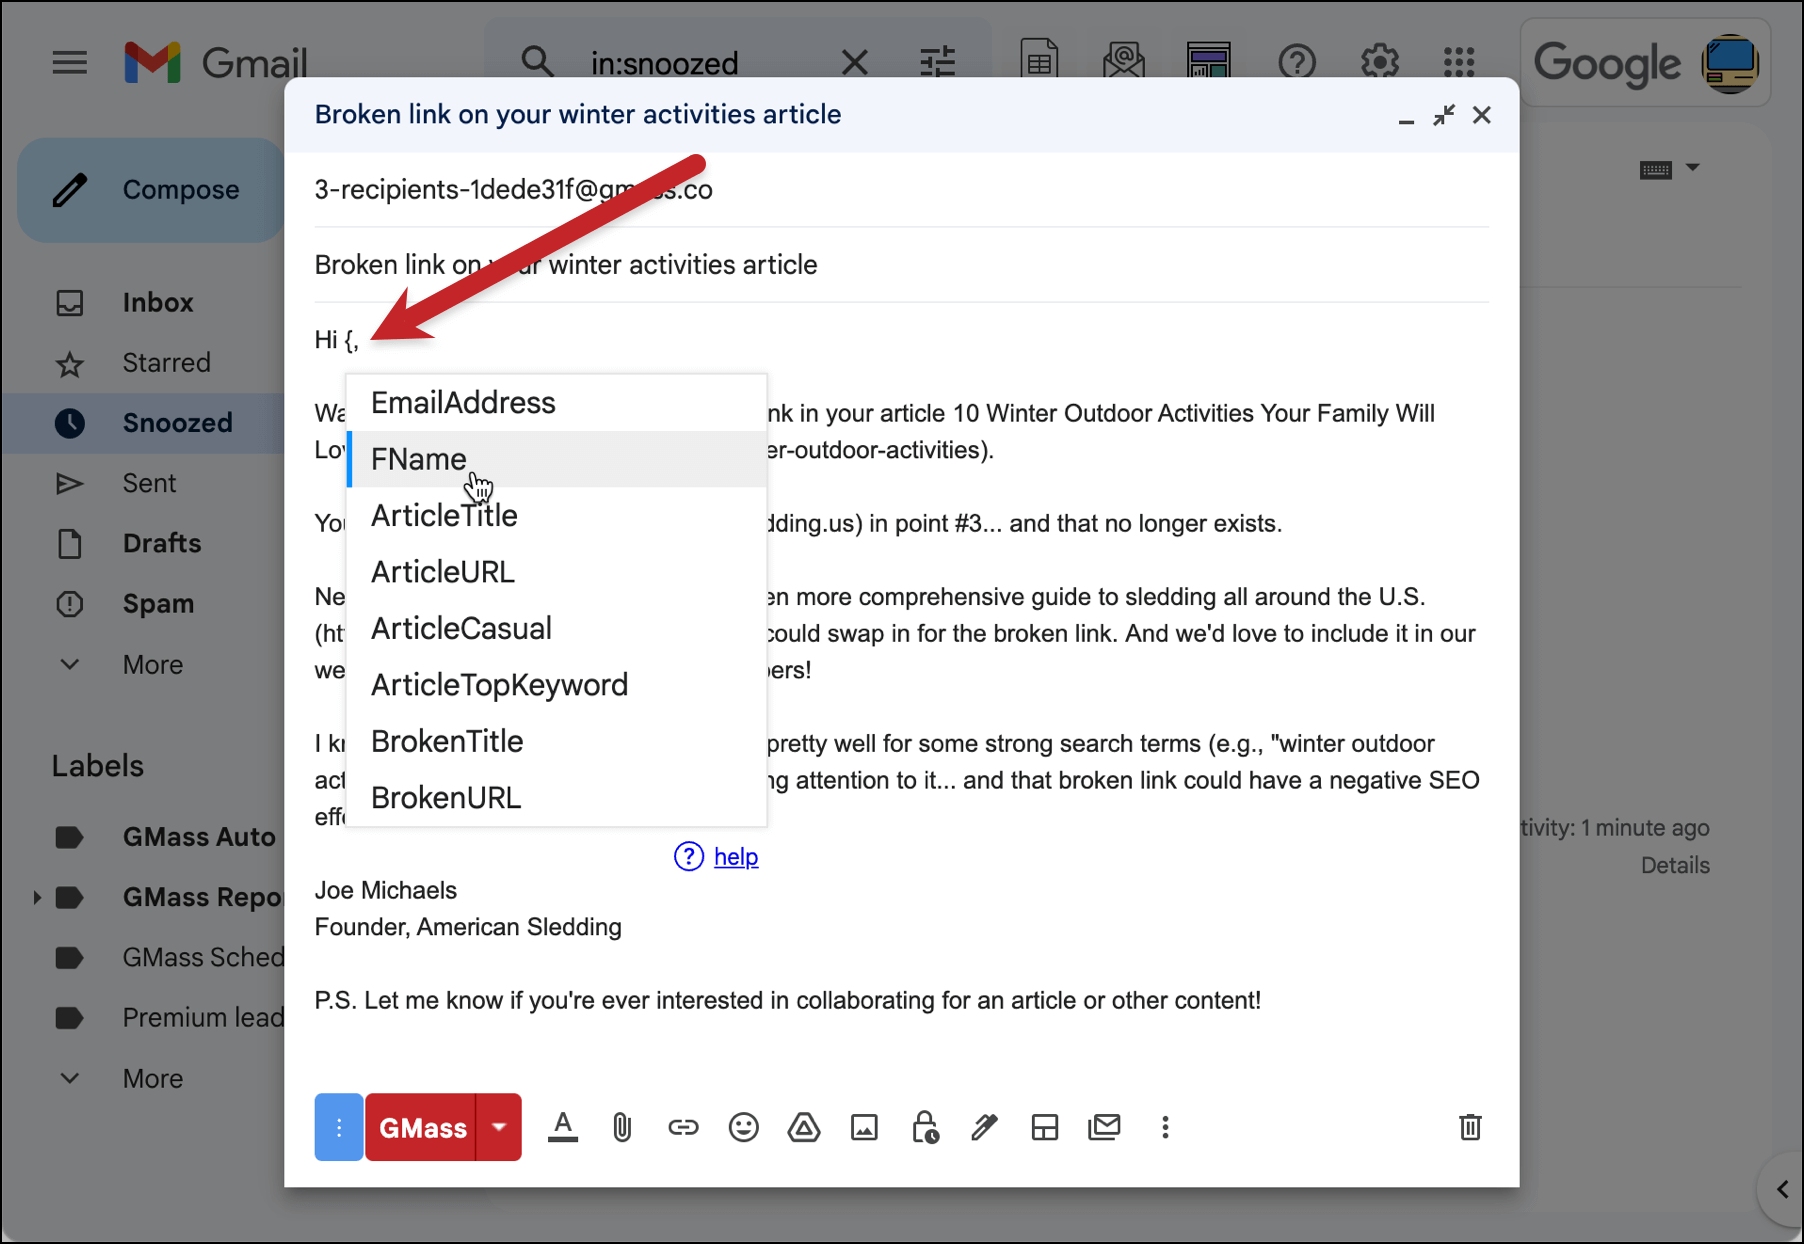 Mail merge tag options in the email